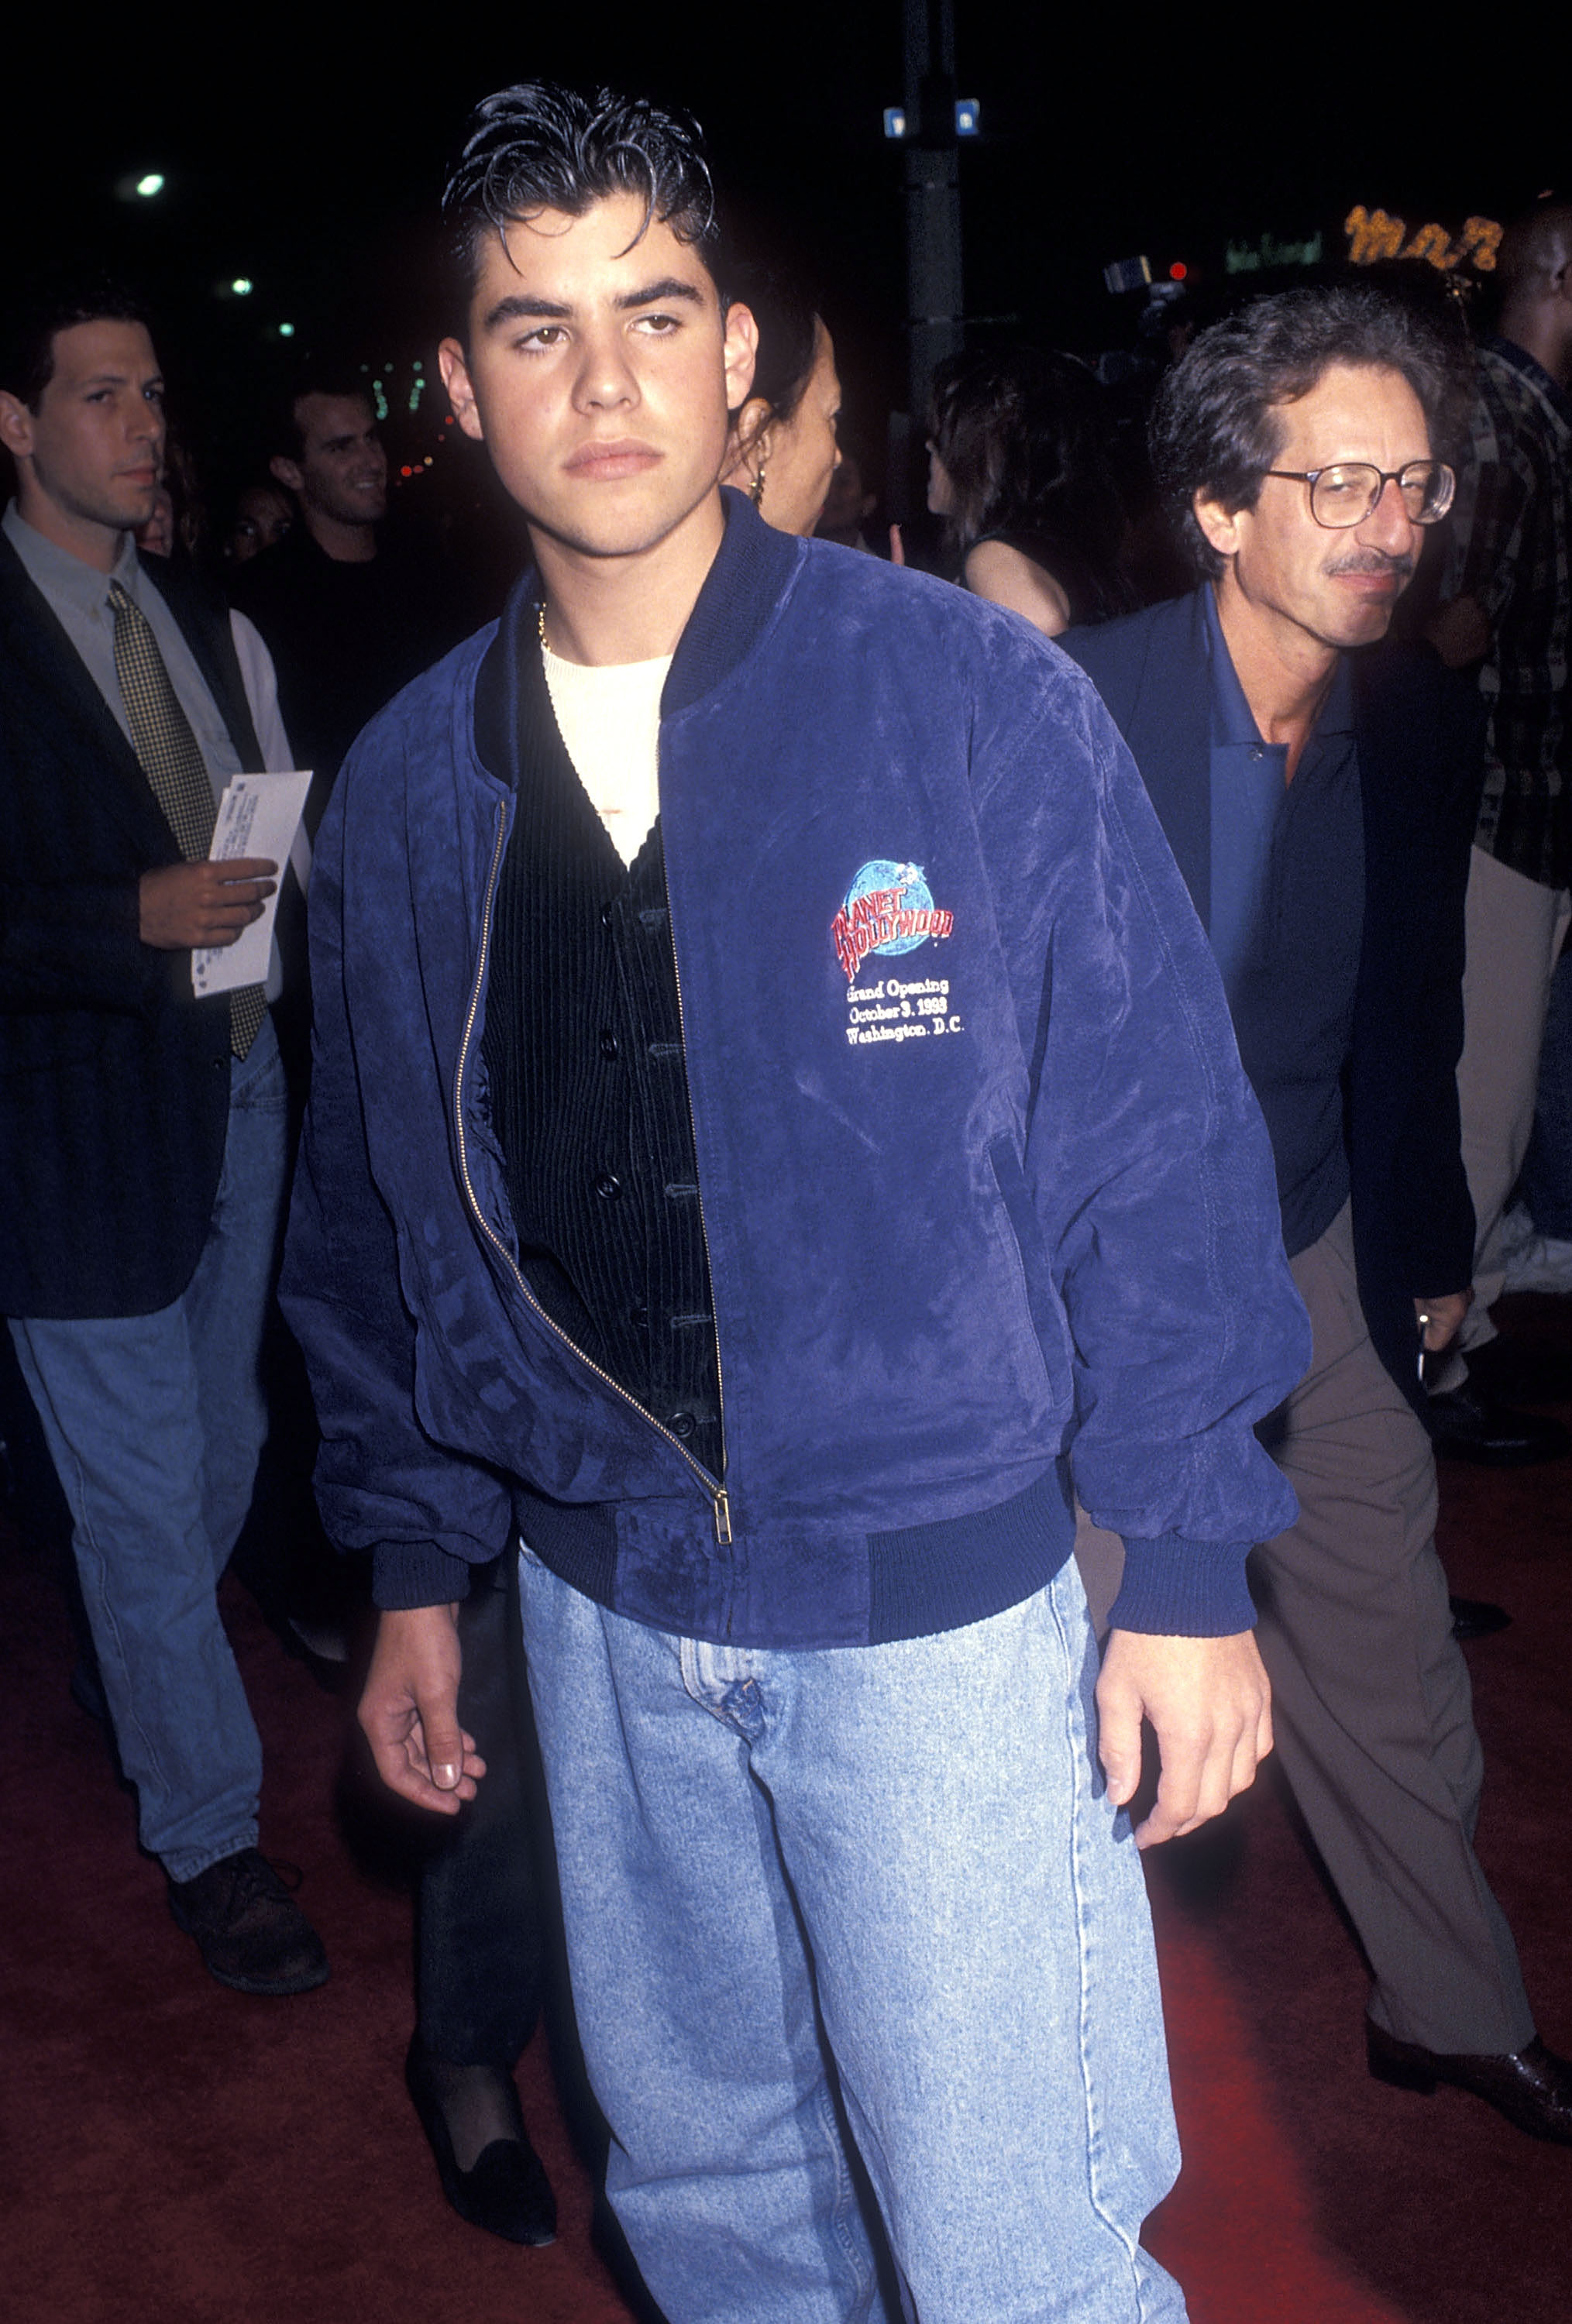 Sage Stallone at the "Demolition Man" premiere in Westwood, California on October 7, 1993 | Source: Getty Images